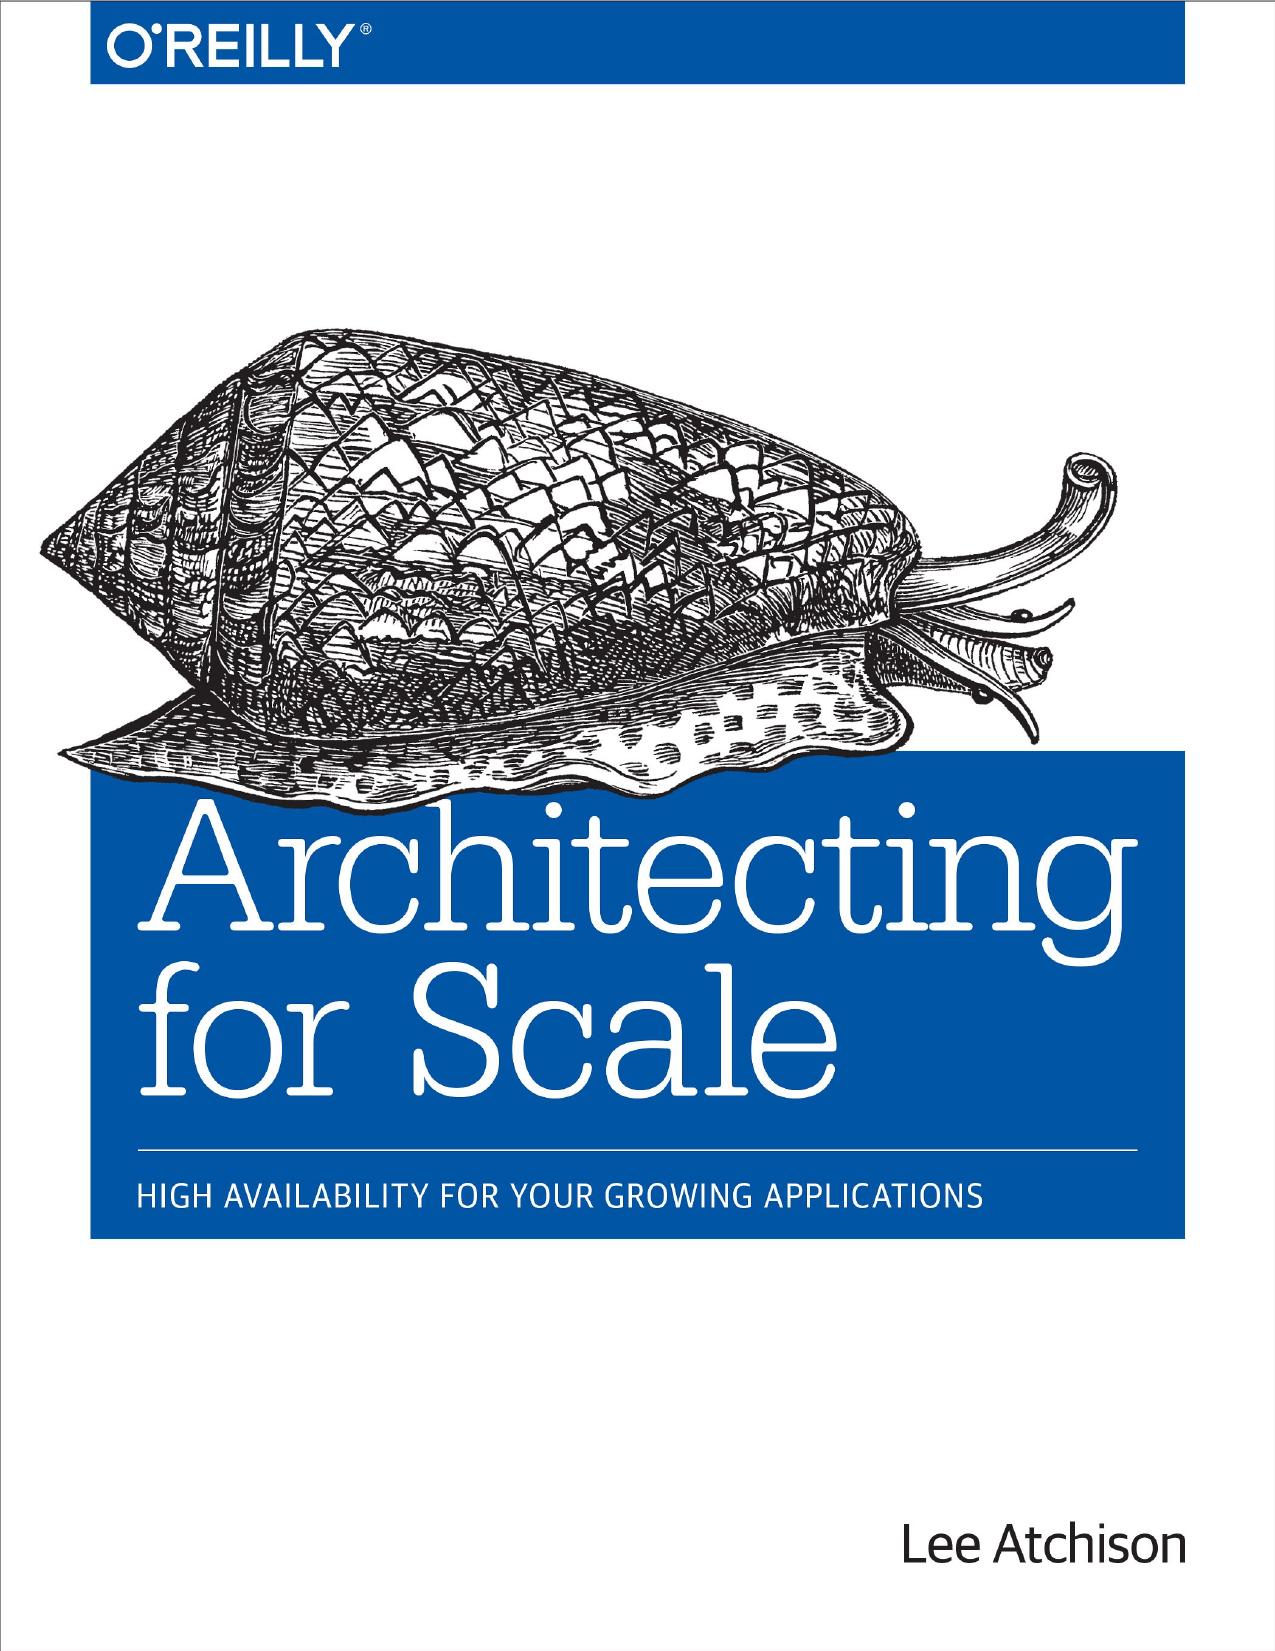 Architecting For Scale by Lee Atchison